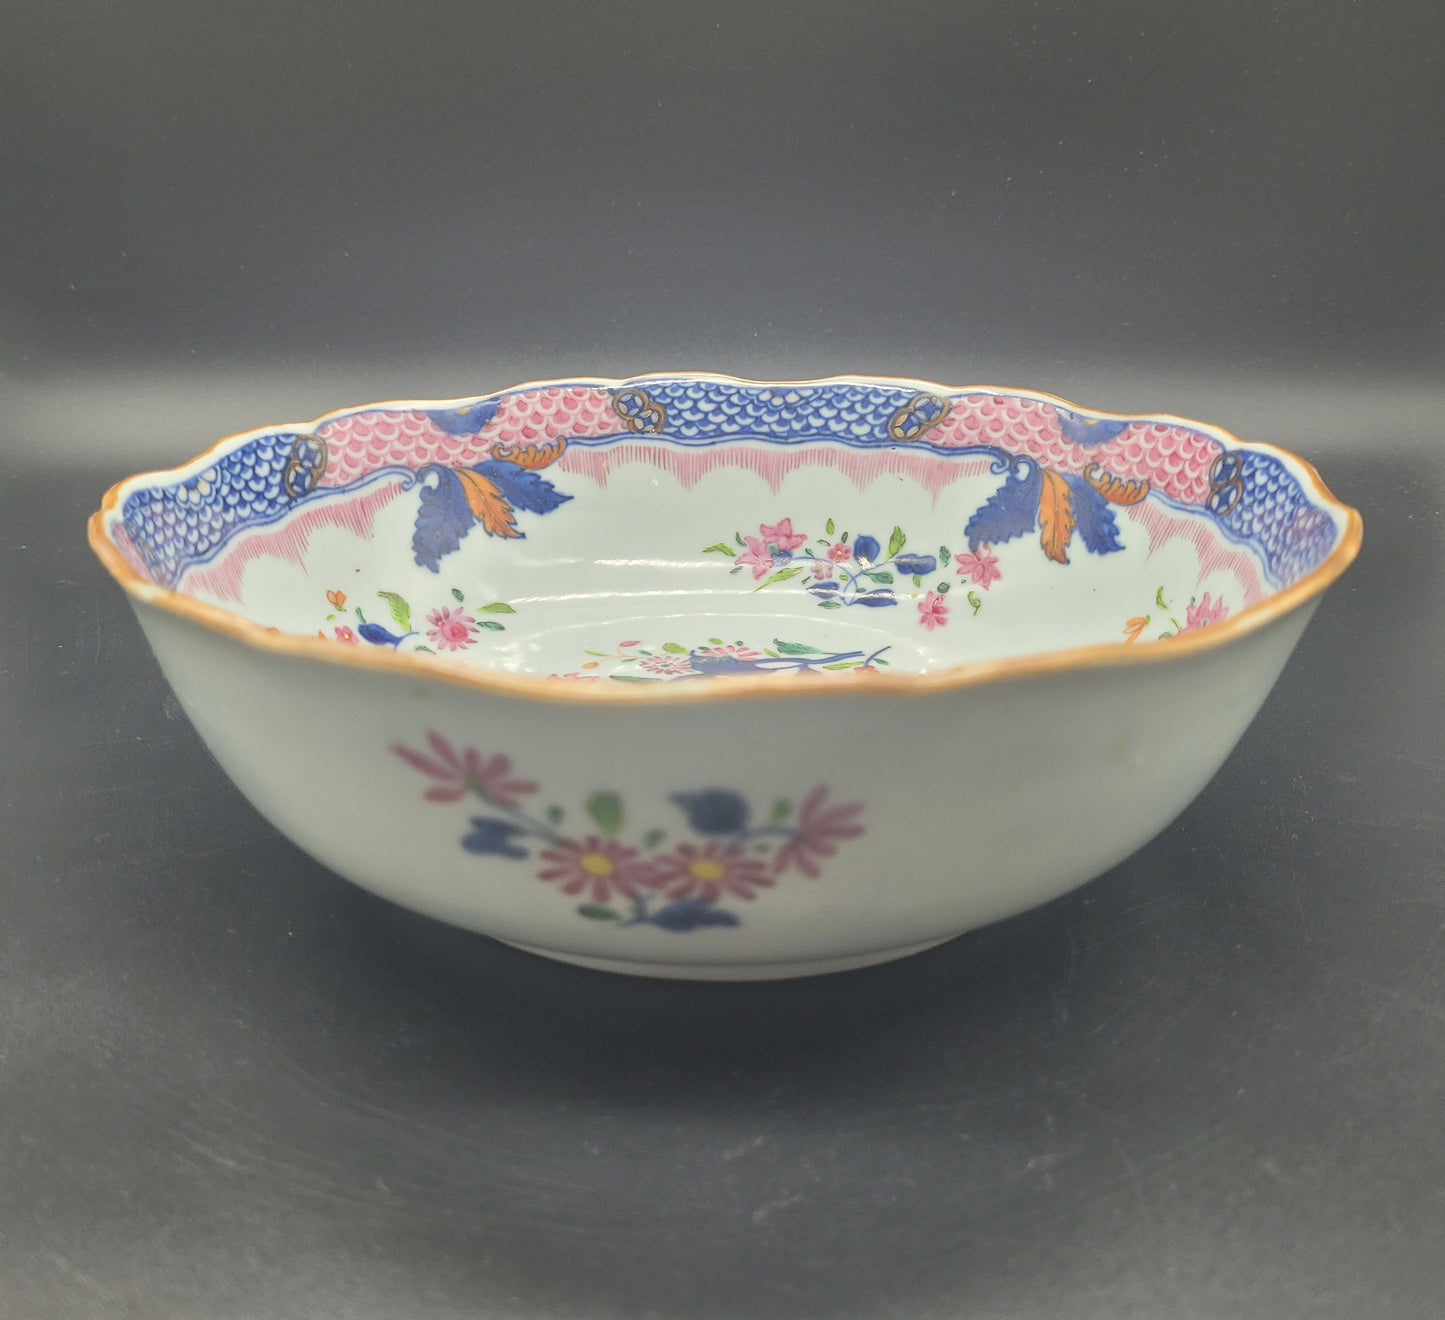 Buy Chinese Antiques Online Beautiful Extremely well decorated Chinese 18th / 19th Century Famille Rose Export Bowl